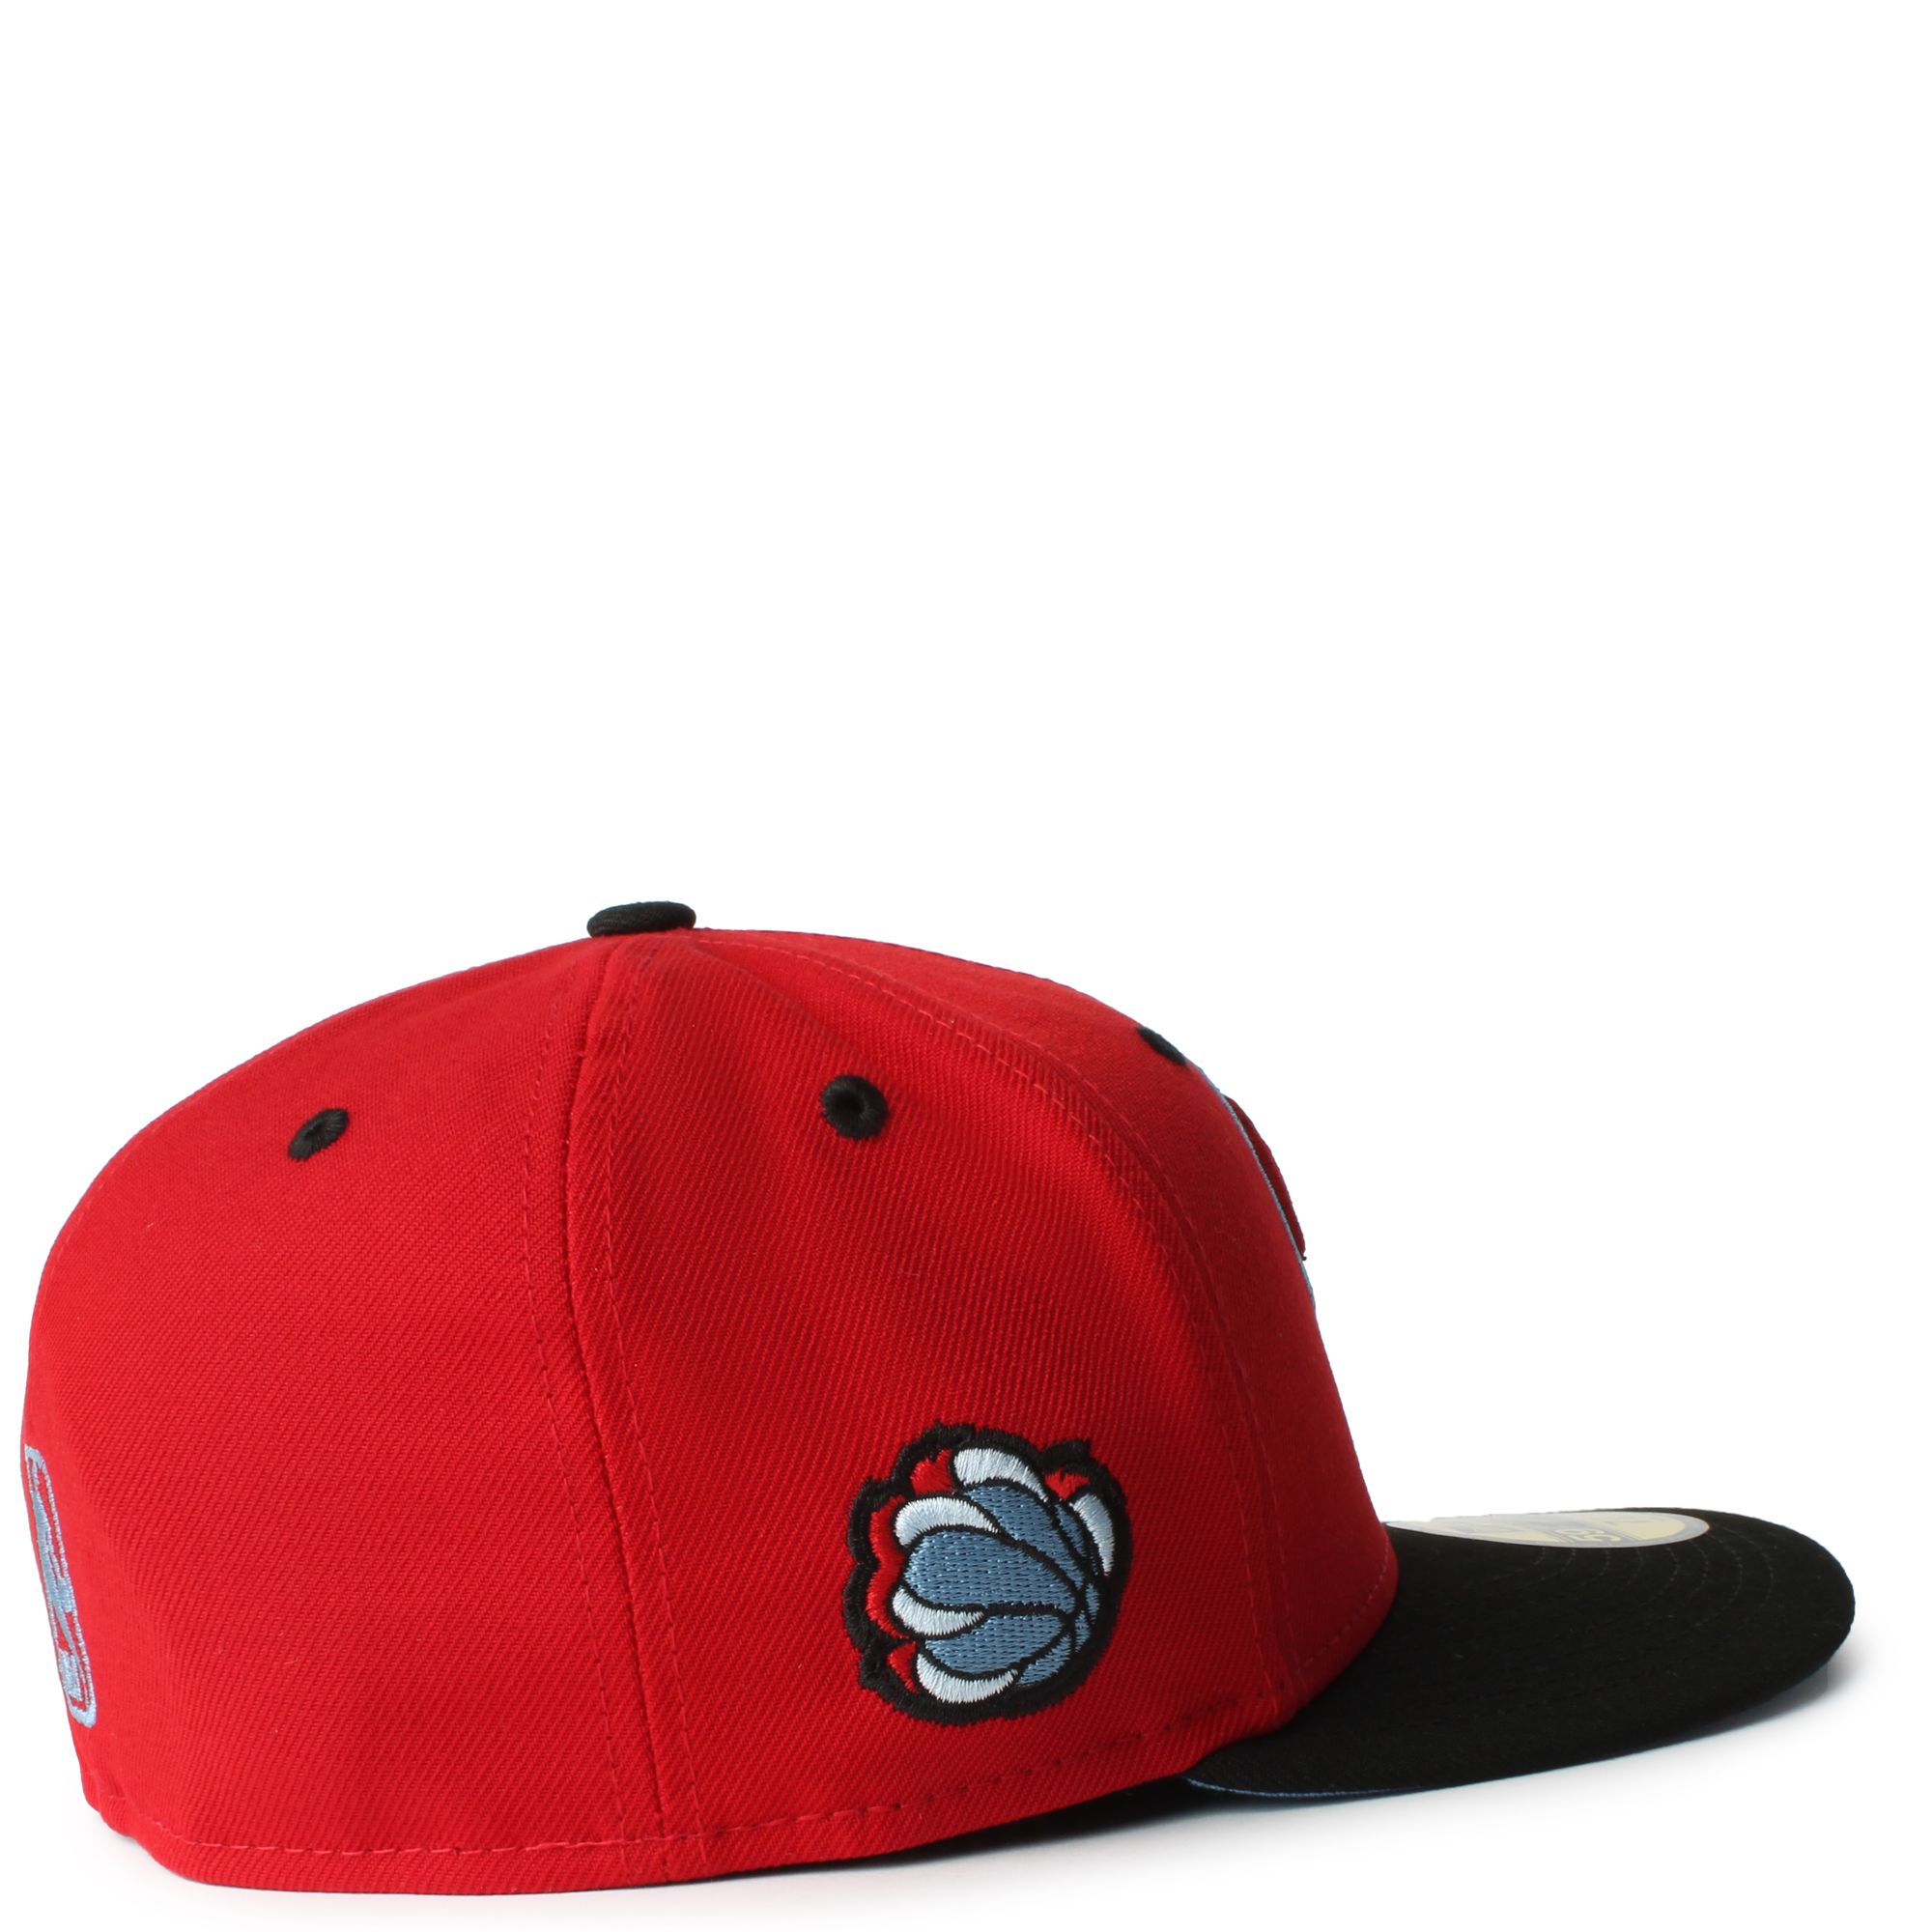 memphis grizzlies youth hat